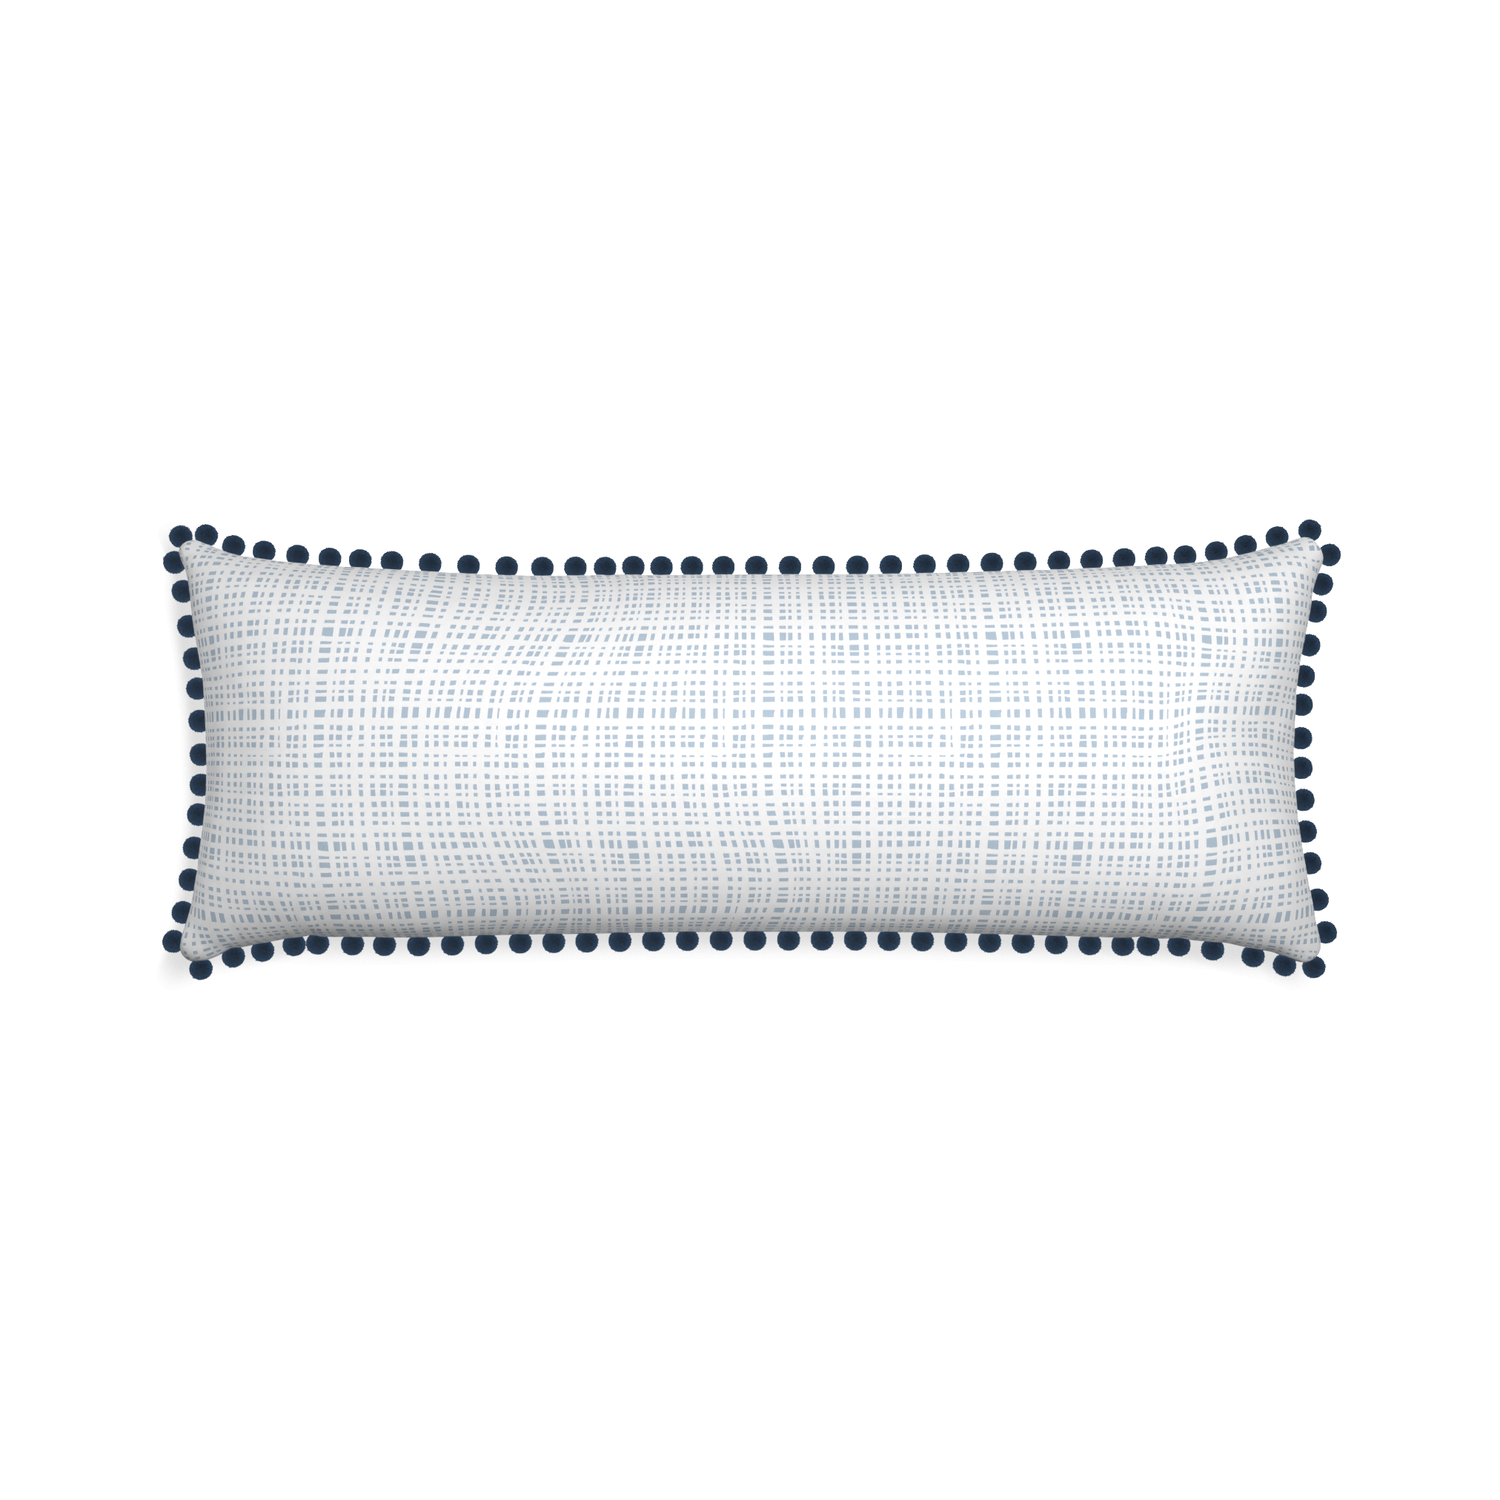 Xl-lumbar ginger custom plaid sky bluepillow with c on white background